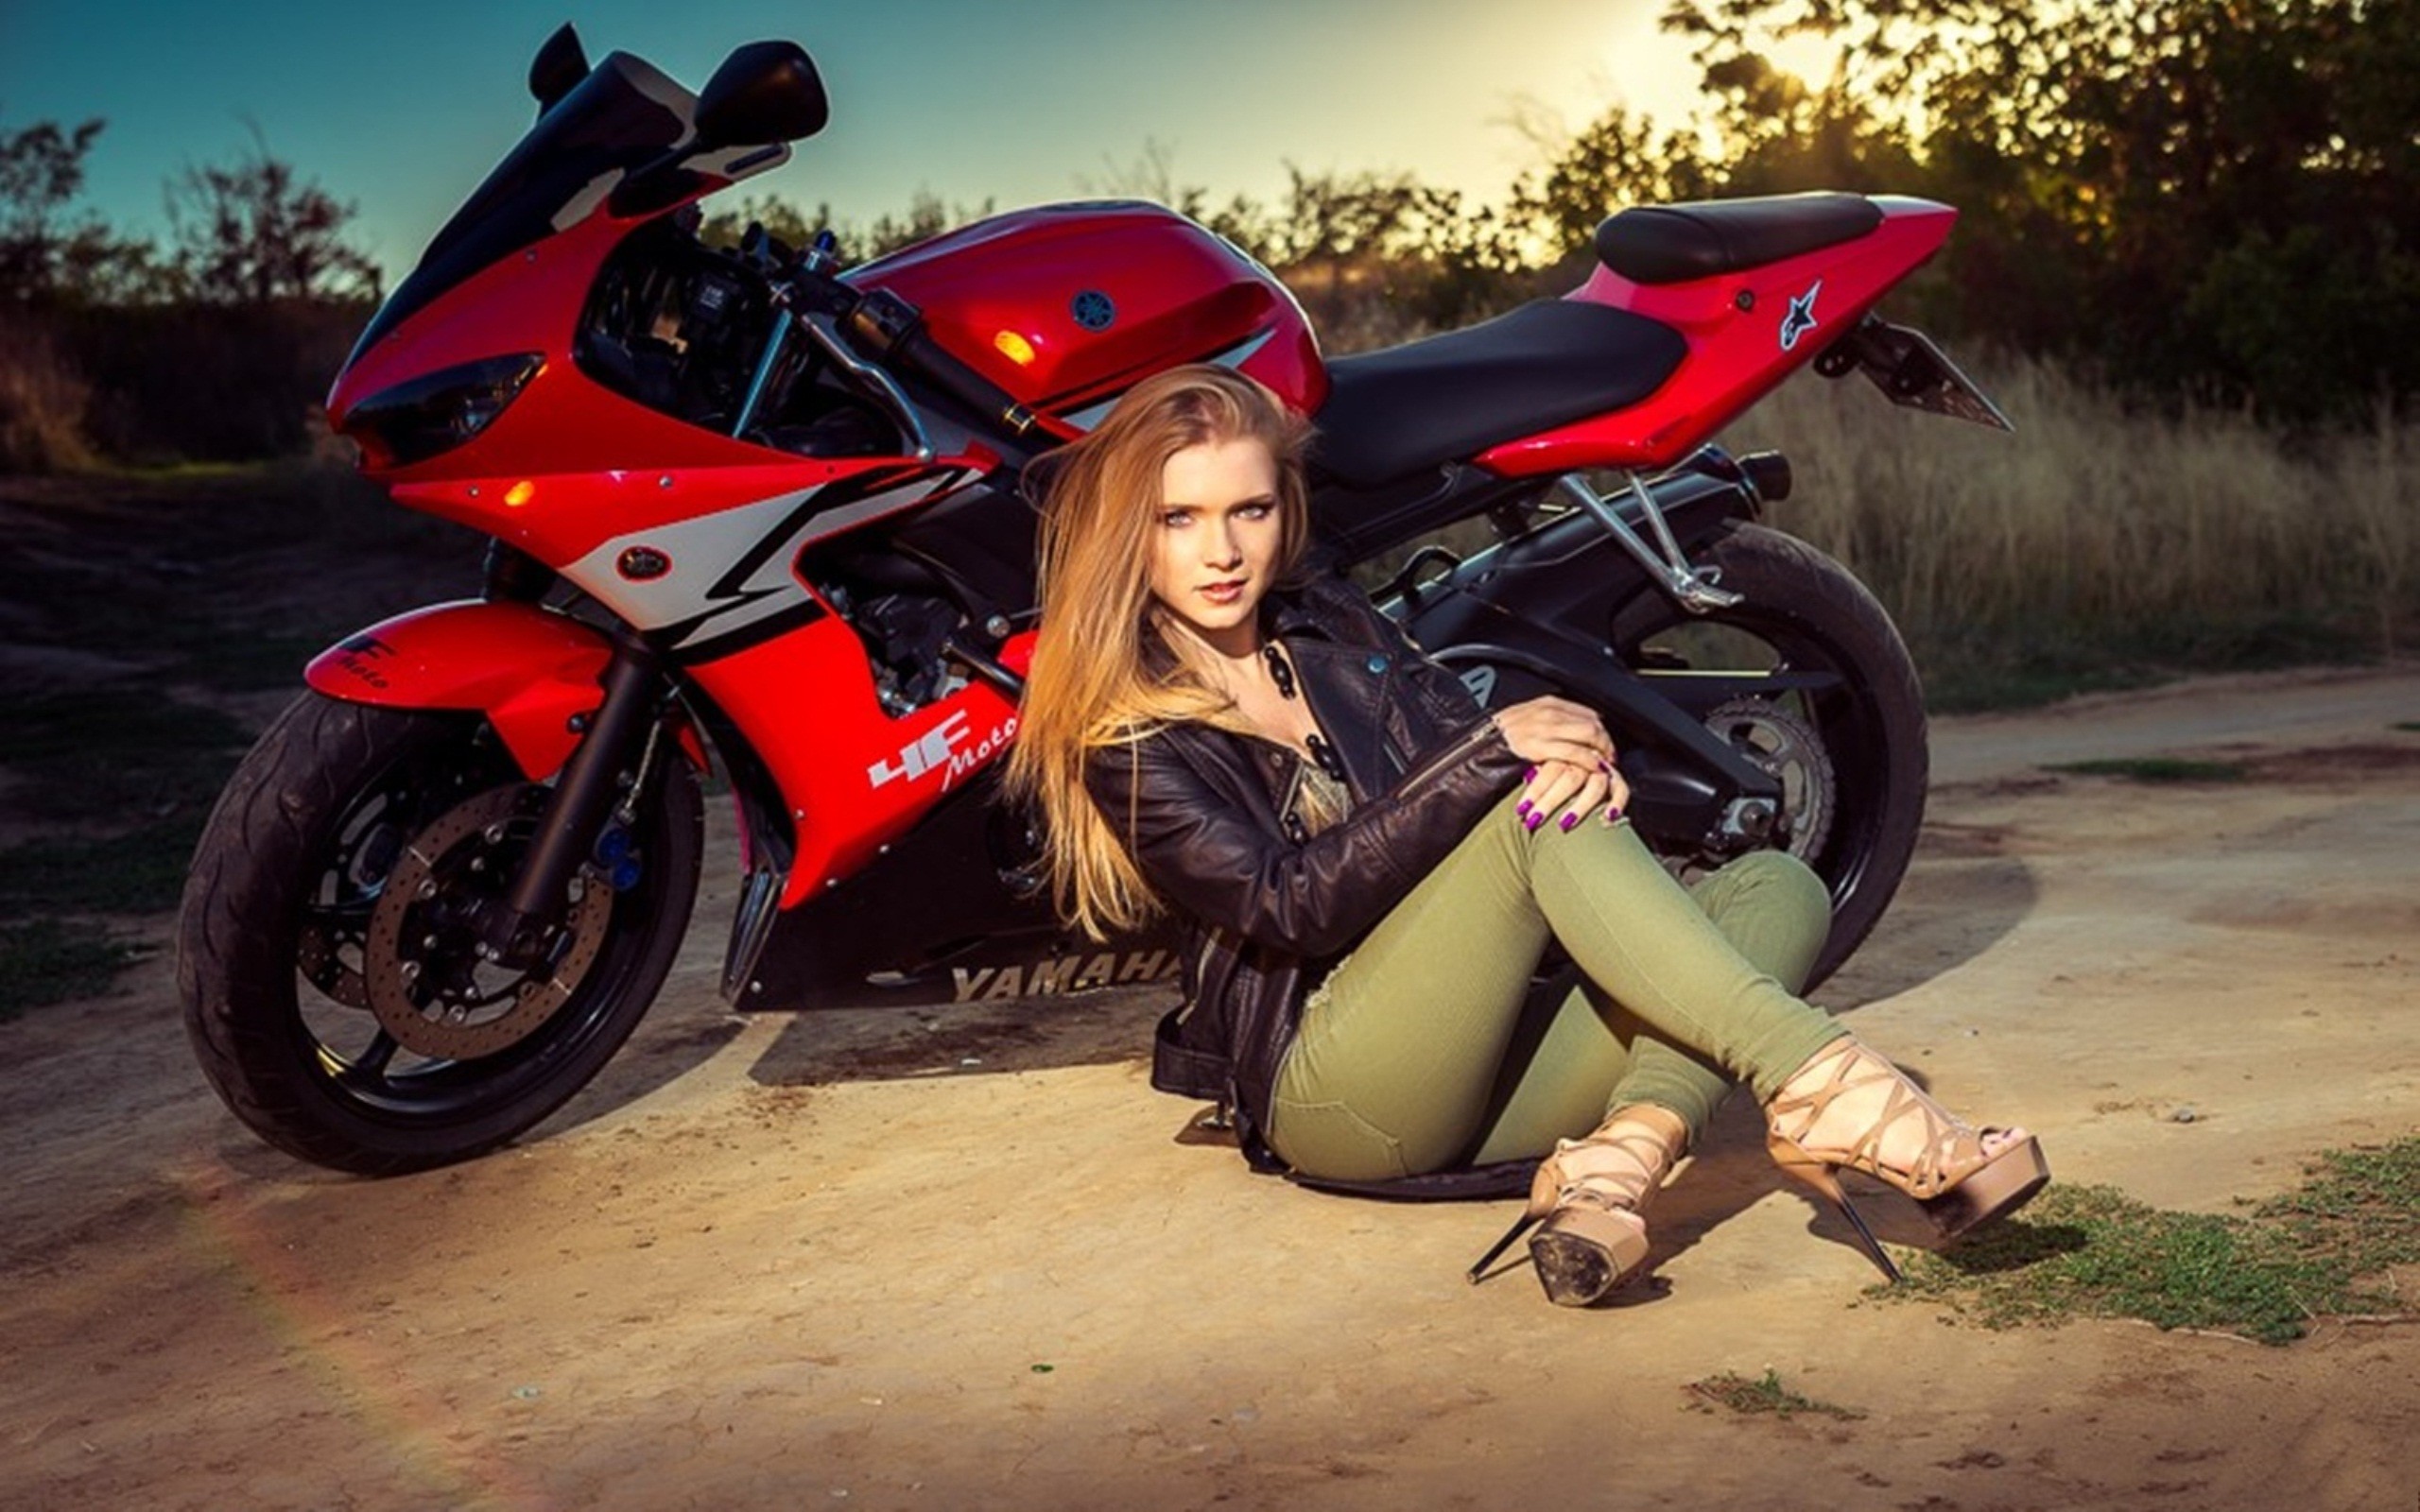 Hd Wallpapers Motorcycles And Girls 70 Images 34965 Hot Sex Picture 9717